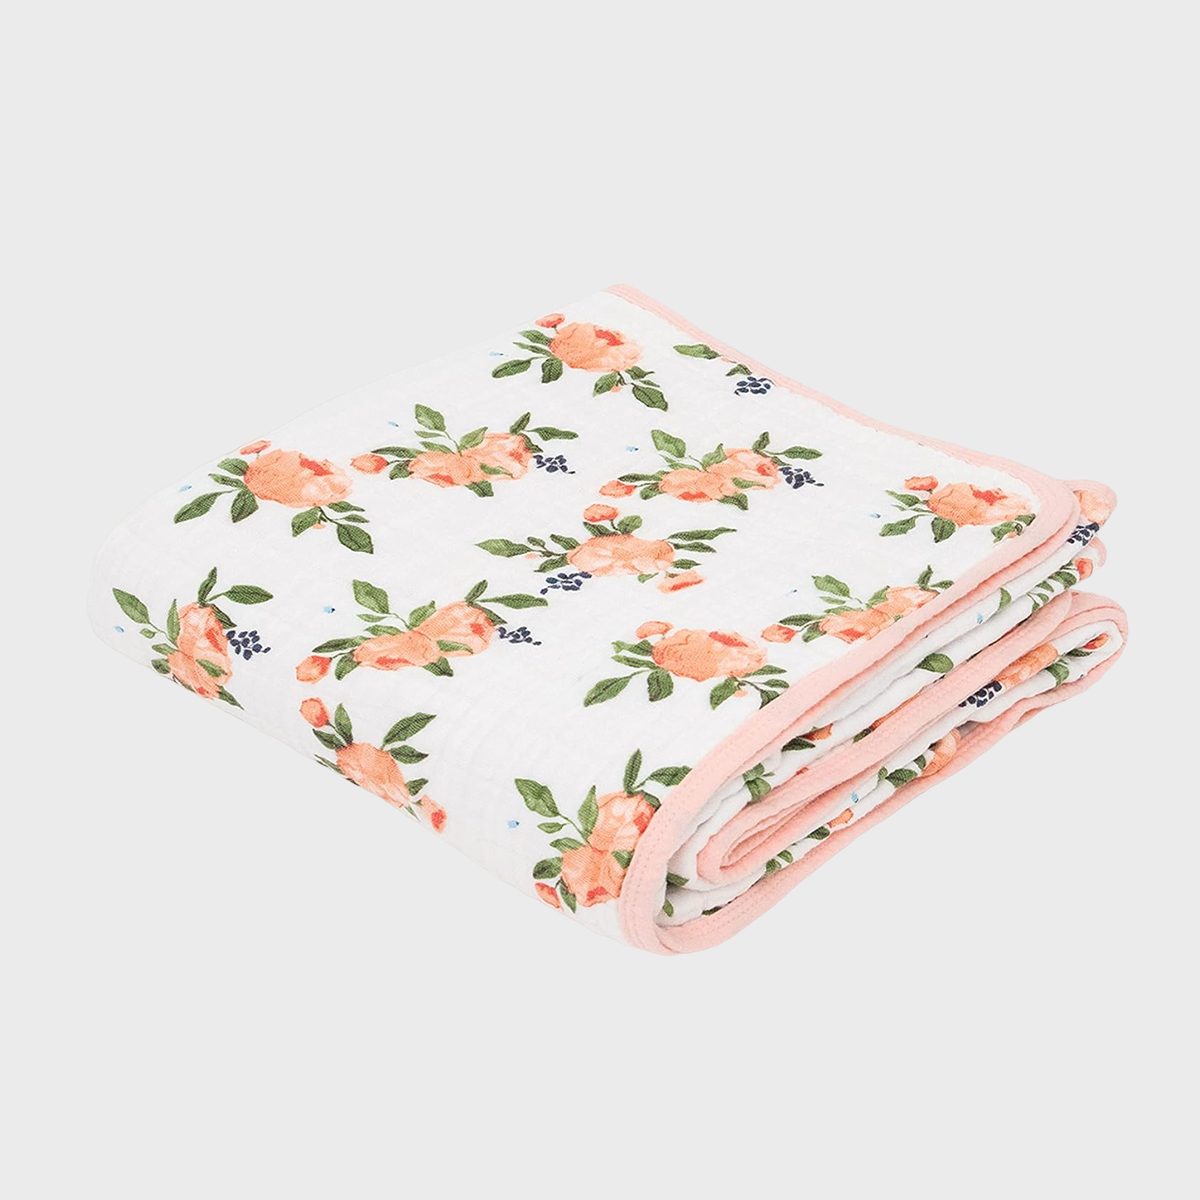 <p>This soft and cuddly <a href="https://www.amazon.com/Little-Unicorn-Cotton-Muslin-Quilt/dp/B07L4YTQRQ" rel="noopener noreferrer">quilt blanket</a>, which is made from cotton muslin, is something that will offer her warmth, comfort and security for years to come. As she gets older, she can even use it as a picnic blanket when she hosts tea parties for her favorite friends or to tuck her dollies into bed each night. But for now, it's a <a href="https://www.rd.com/list/mothers-day-gifts-for-new-moms/">great gift for a new mom</a> to soak up the baby snuggles.</p> <p class="listicle-page__cta-button-shop"><a class="shop-btn" href="https://www.amazon.com/Little-Unicorn-Cotton-Muslin-Quilt/dp/B07L4YTQRQ/">Shop Now</a></p>